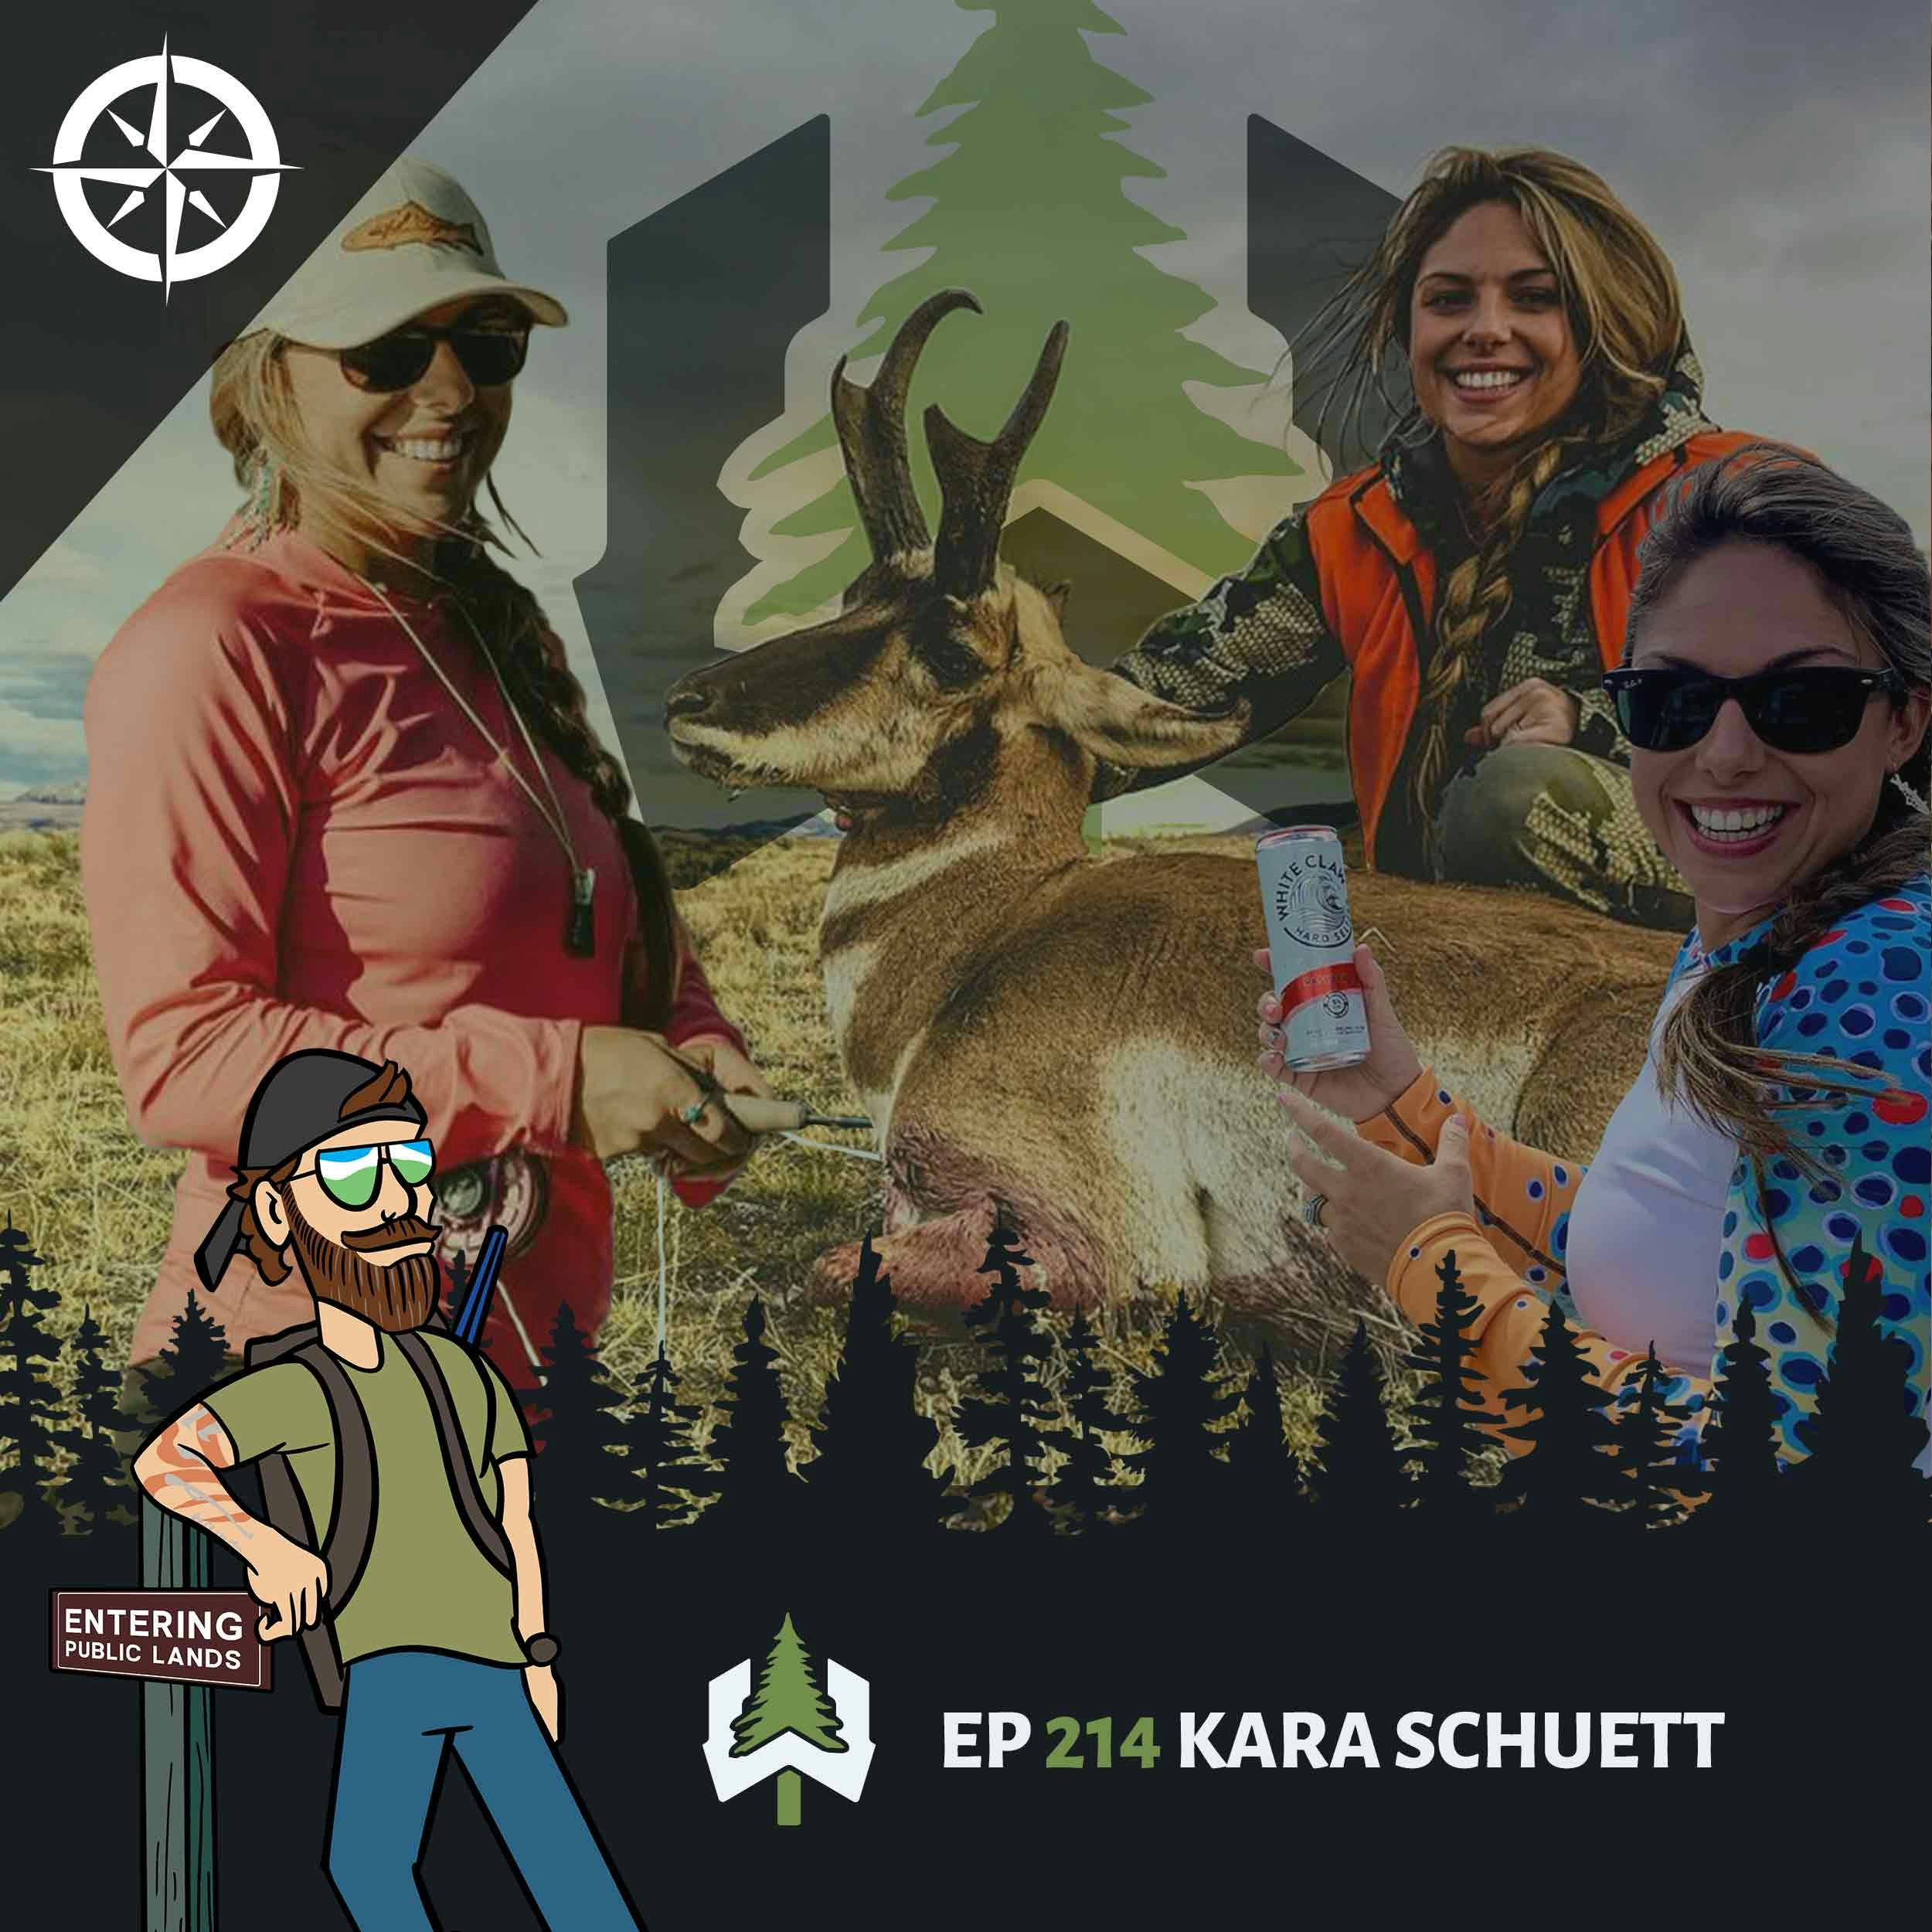 Ep 214 - Kara Schuett: Hunting, Fly Fishing and the Great State of Montana